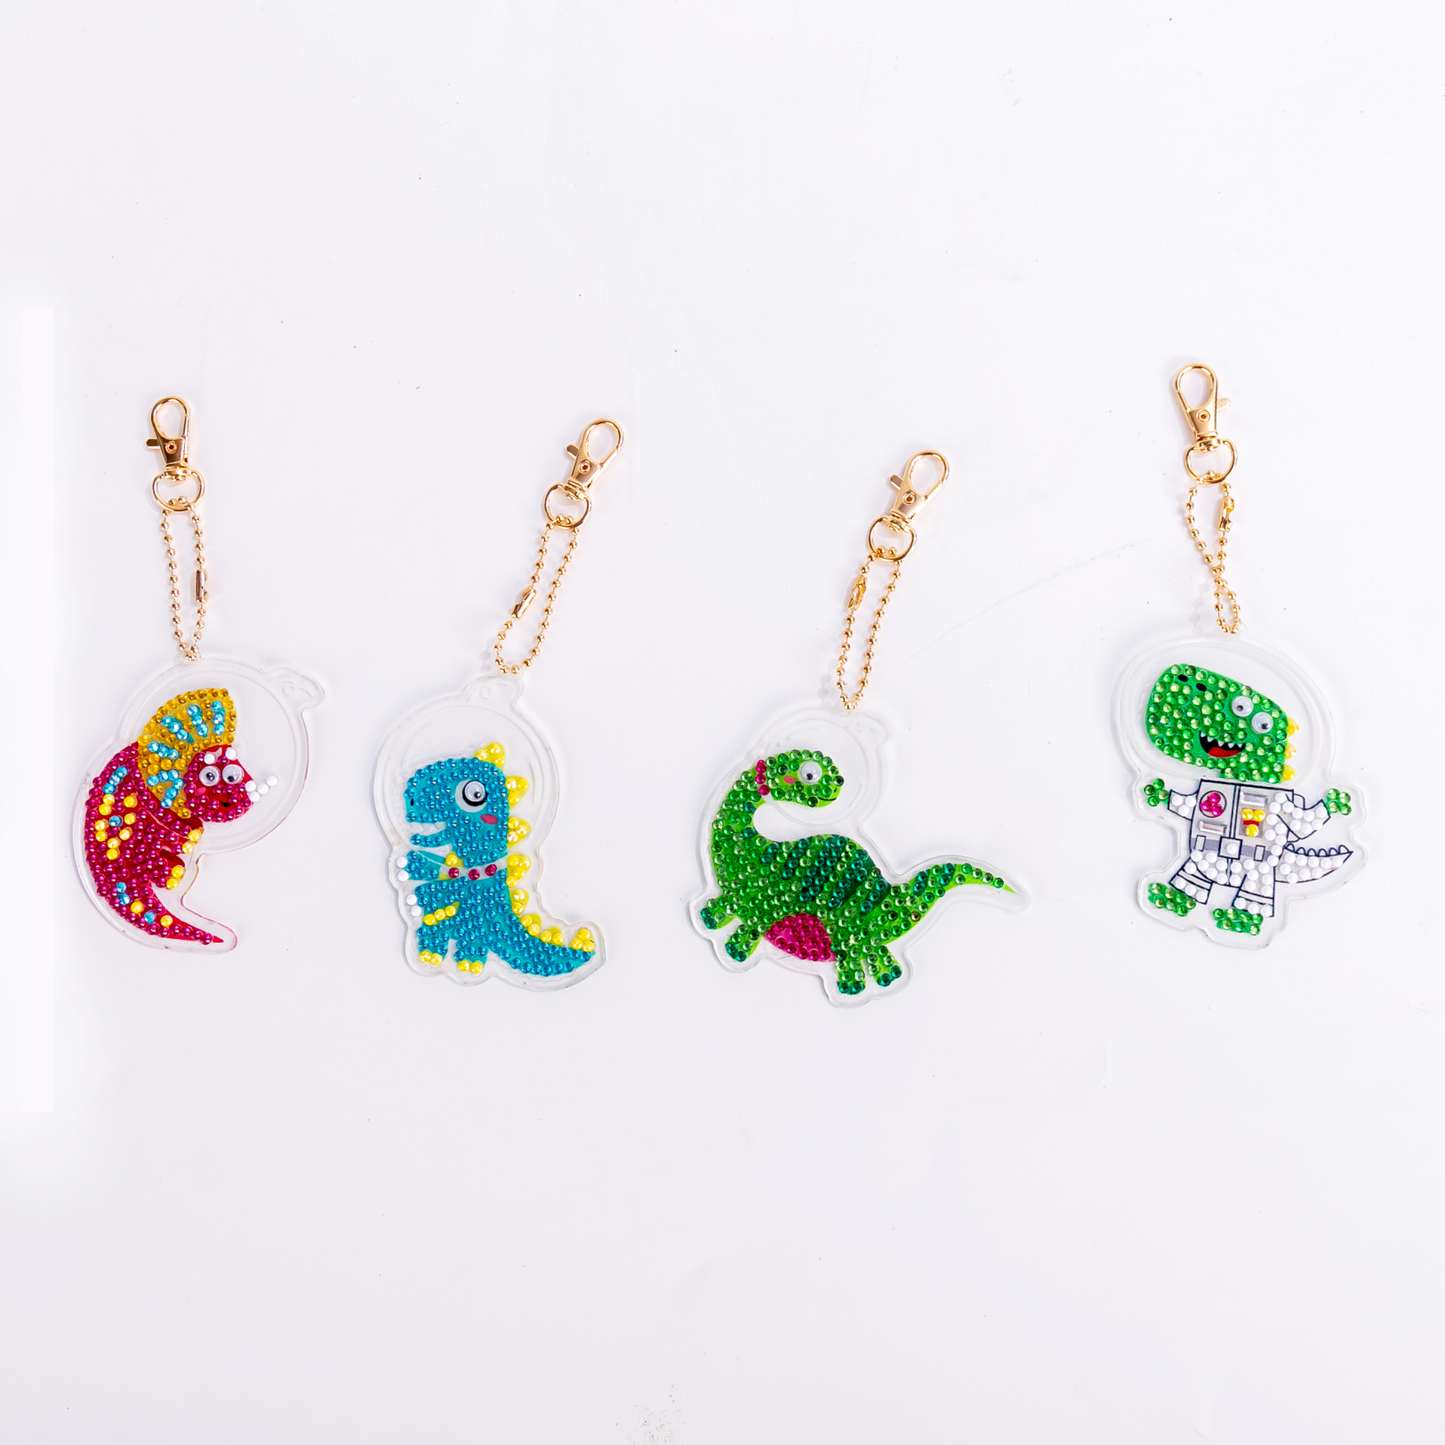 One-sided sticker special diamond painted keychain key ring-Dinosaur